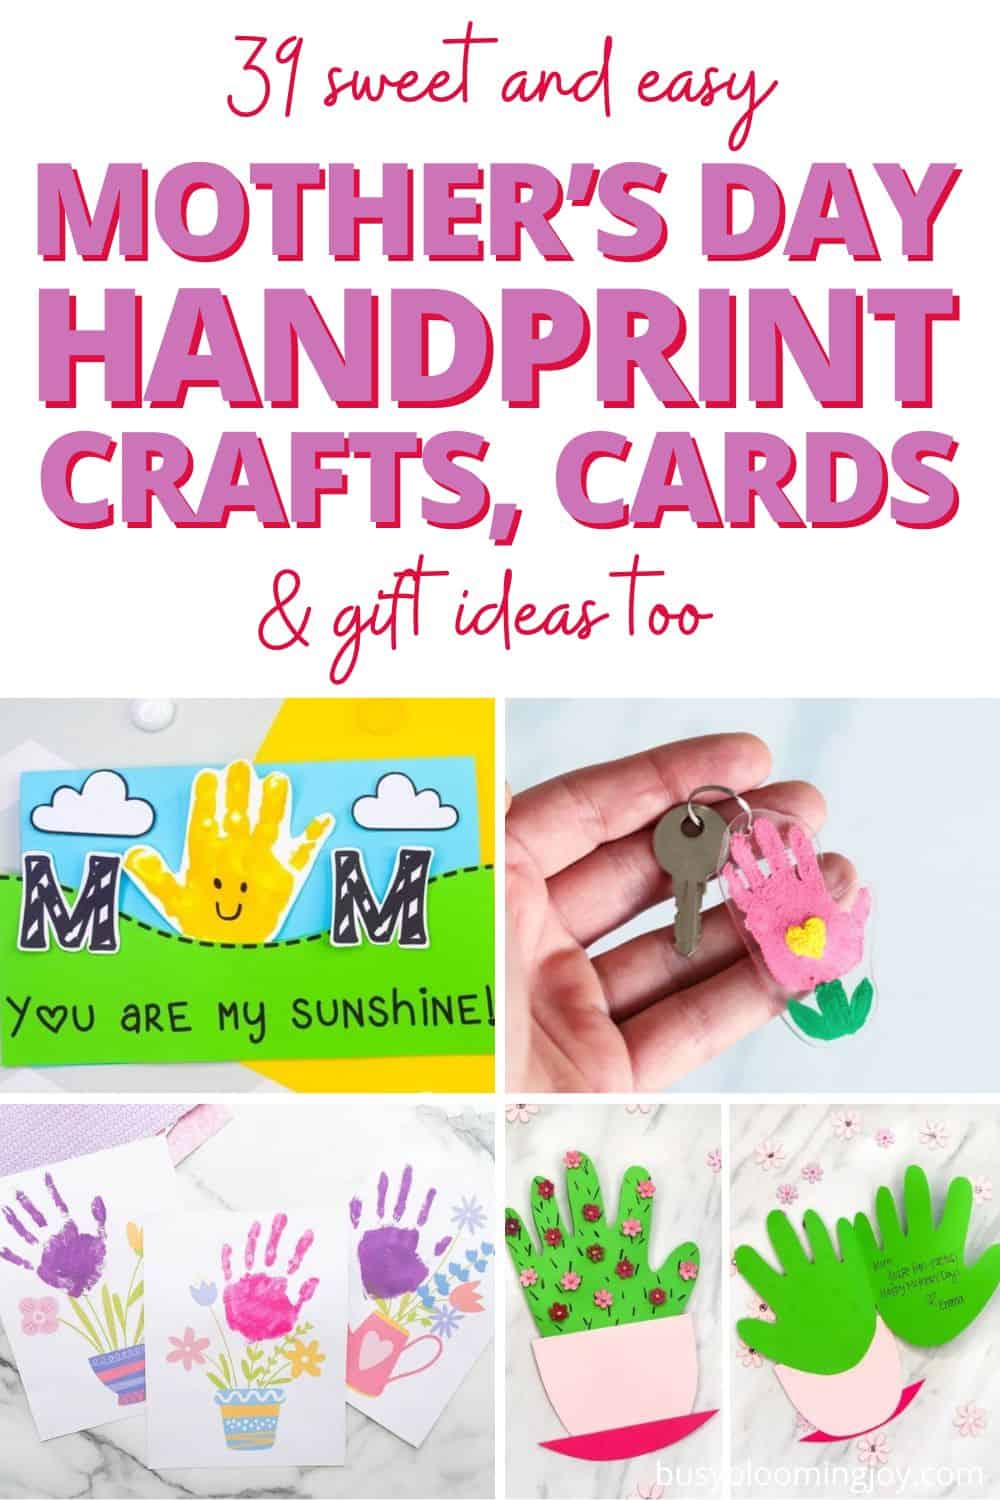 Mother's day handprint crafts + feature image